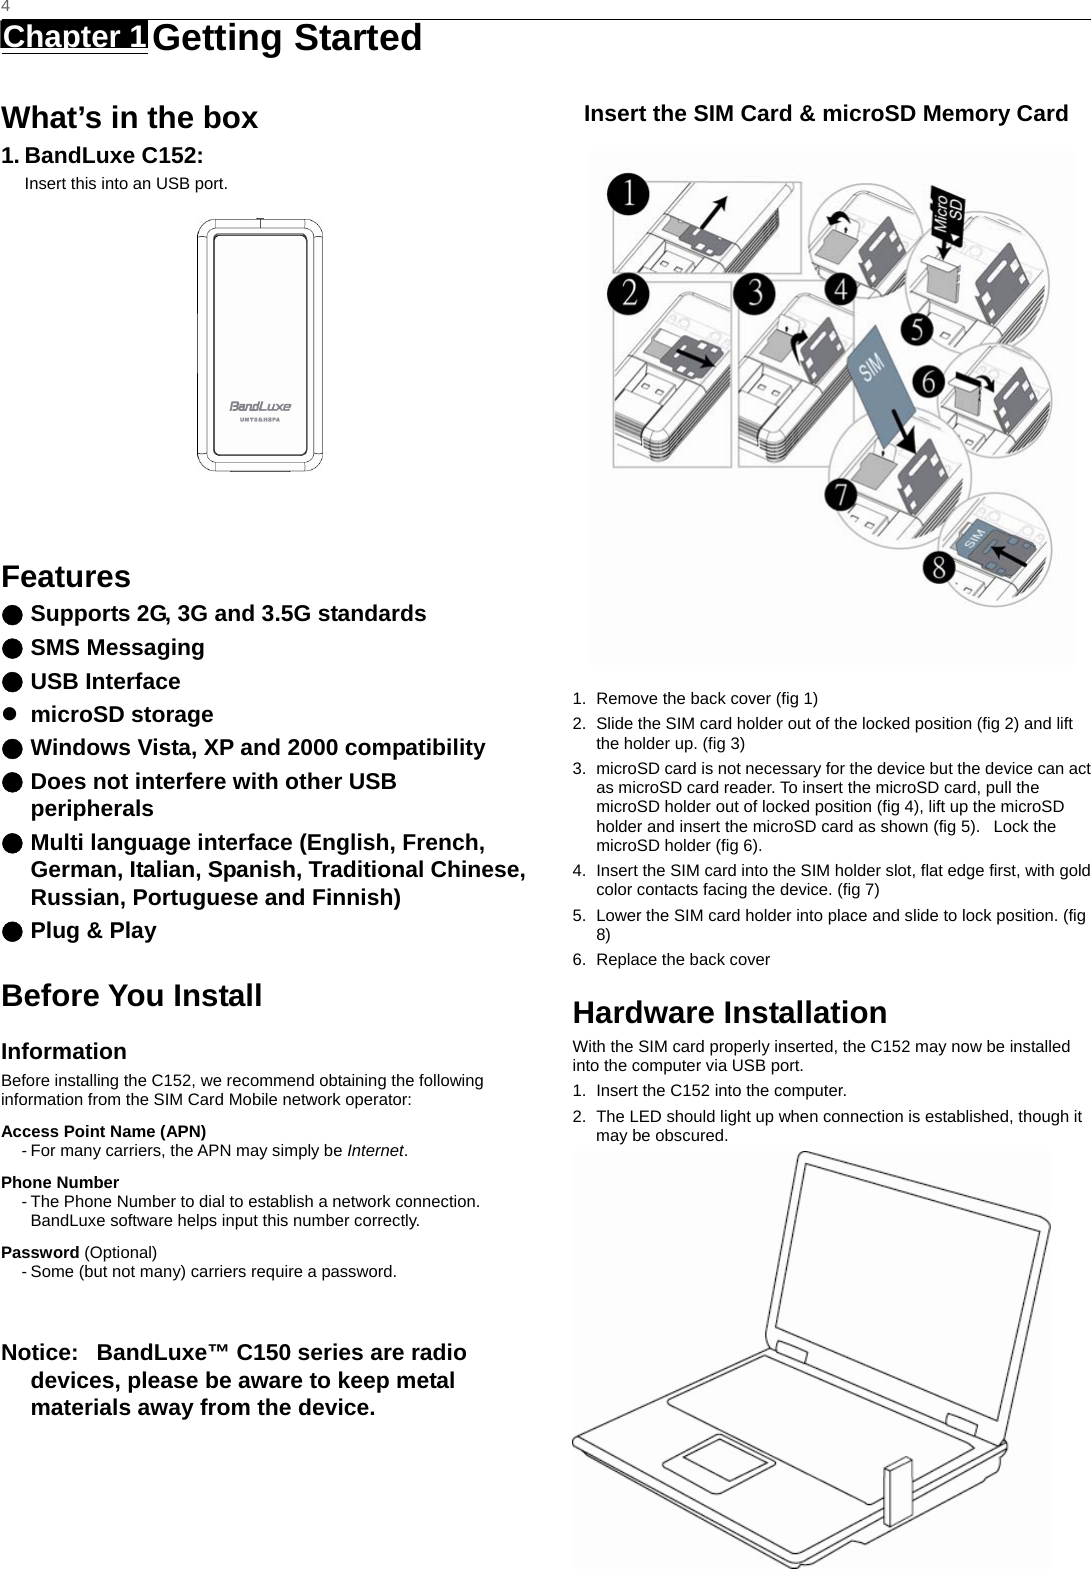   4 Chapter 1   Getting Started   What’s in the box 1. BandLuxe C152: Insert this into an USB port.   Features ● Supports 2G, 3G and 3.5G standards ● SMS Messaging ● USB Interface z microSD storage ● Windows Vista, XP and 2000 compatibility ● Does not interfere with other USB peripherals ● Multi language interface (English, French, German, Italian, Spanish, Traditional Chinese, Russian, Portuguese and Finnish) ● Plug &amp; Play    Before You Install Information Before installing the C152, we recommend obtaining the following information from the SIM Card Mobile network operator: Access Point Name (APN) - For many carriers, the APN may simply be Internet. Phone Number - The Phone Number to dial to establish a network connection.   BandLuxe software helps input this number correctly. Password (Optional) - Some (but not many) carriers require a password.  Notice:   BandLuxe™ C150 series are radio devices, please be aware to keep metal materials away from the device.    Insert the SIM Card &amp; microSD Memory Card    1.  Remove the back cover (fig 1) 2.  Slide the SIM card holder out of the locked position (fig 2) and lift the holder up. (fig 3) 3.  microSD card is not necessary for the device but the device can act as microSD card reader. To insert the microSD card, pull the microSD holder out of locked position (fig 4), lift up the microSD holder and insert the microSD card as shown (fig 5).   Lock the microSD holder (fig 6). 4.  Insert the SIM card into the SIM holder slot, flat edge first, with gold color contacts facing the device. (fig 7) 5.  Lower the SIM card holder into place and slide to lock position. (fig 8) 6.  Replace the back cover Hardware Installation With the SIM card properly inserted, the C152 may now be installed into the computer via USB port. 1.  Insert the C152 into the computer. 2.  The LED should light up when connection is established, though it may be obscured. 